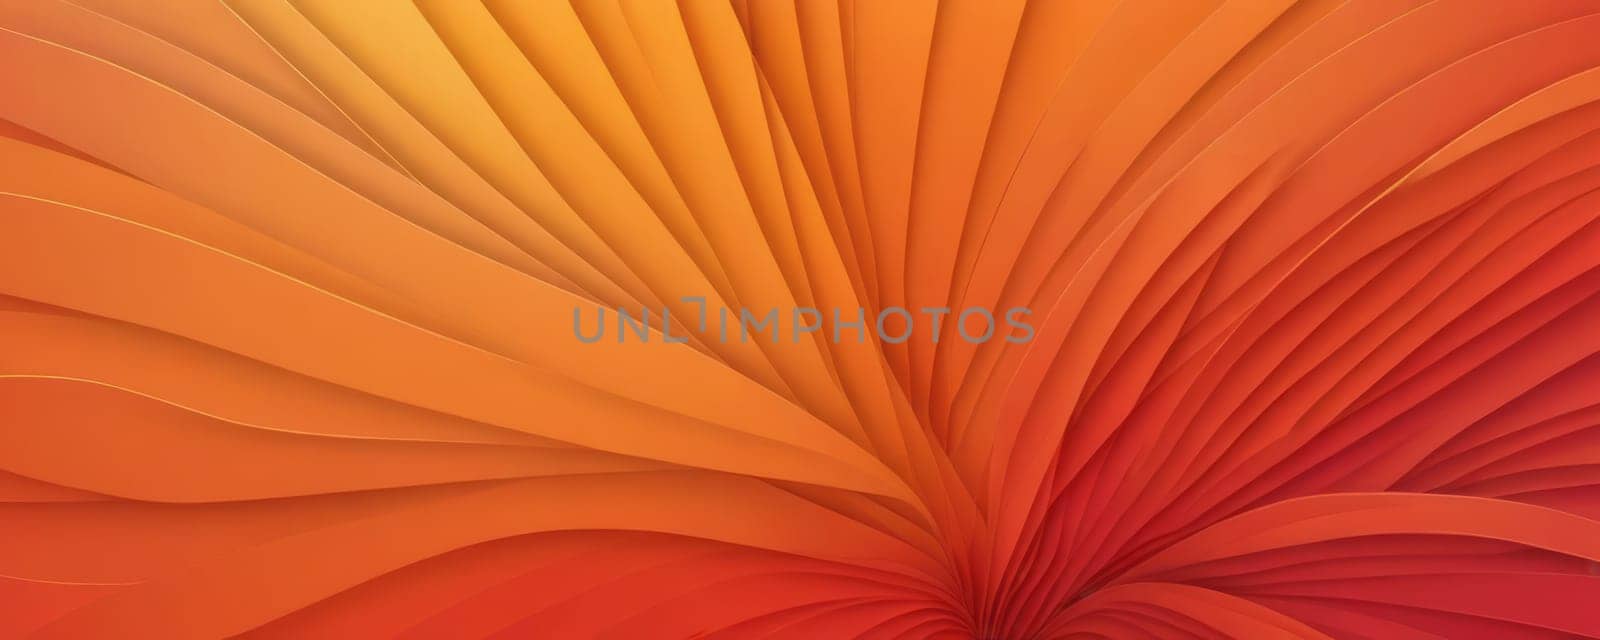 Fanned Shapes in Orange and Indian red by nkotlyar